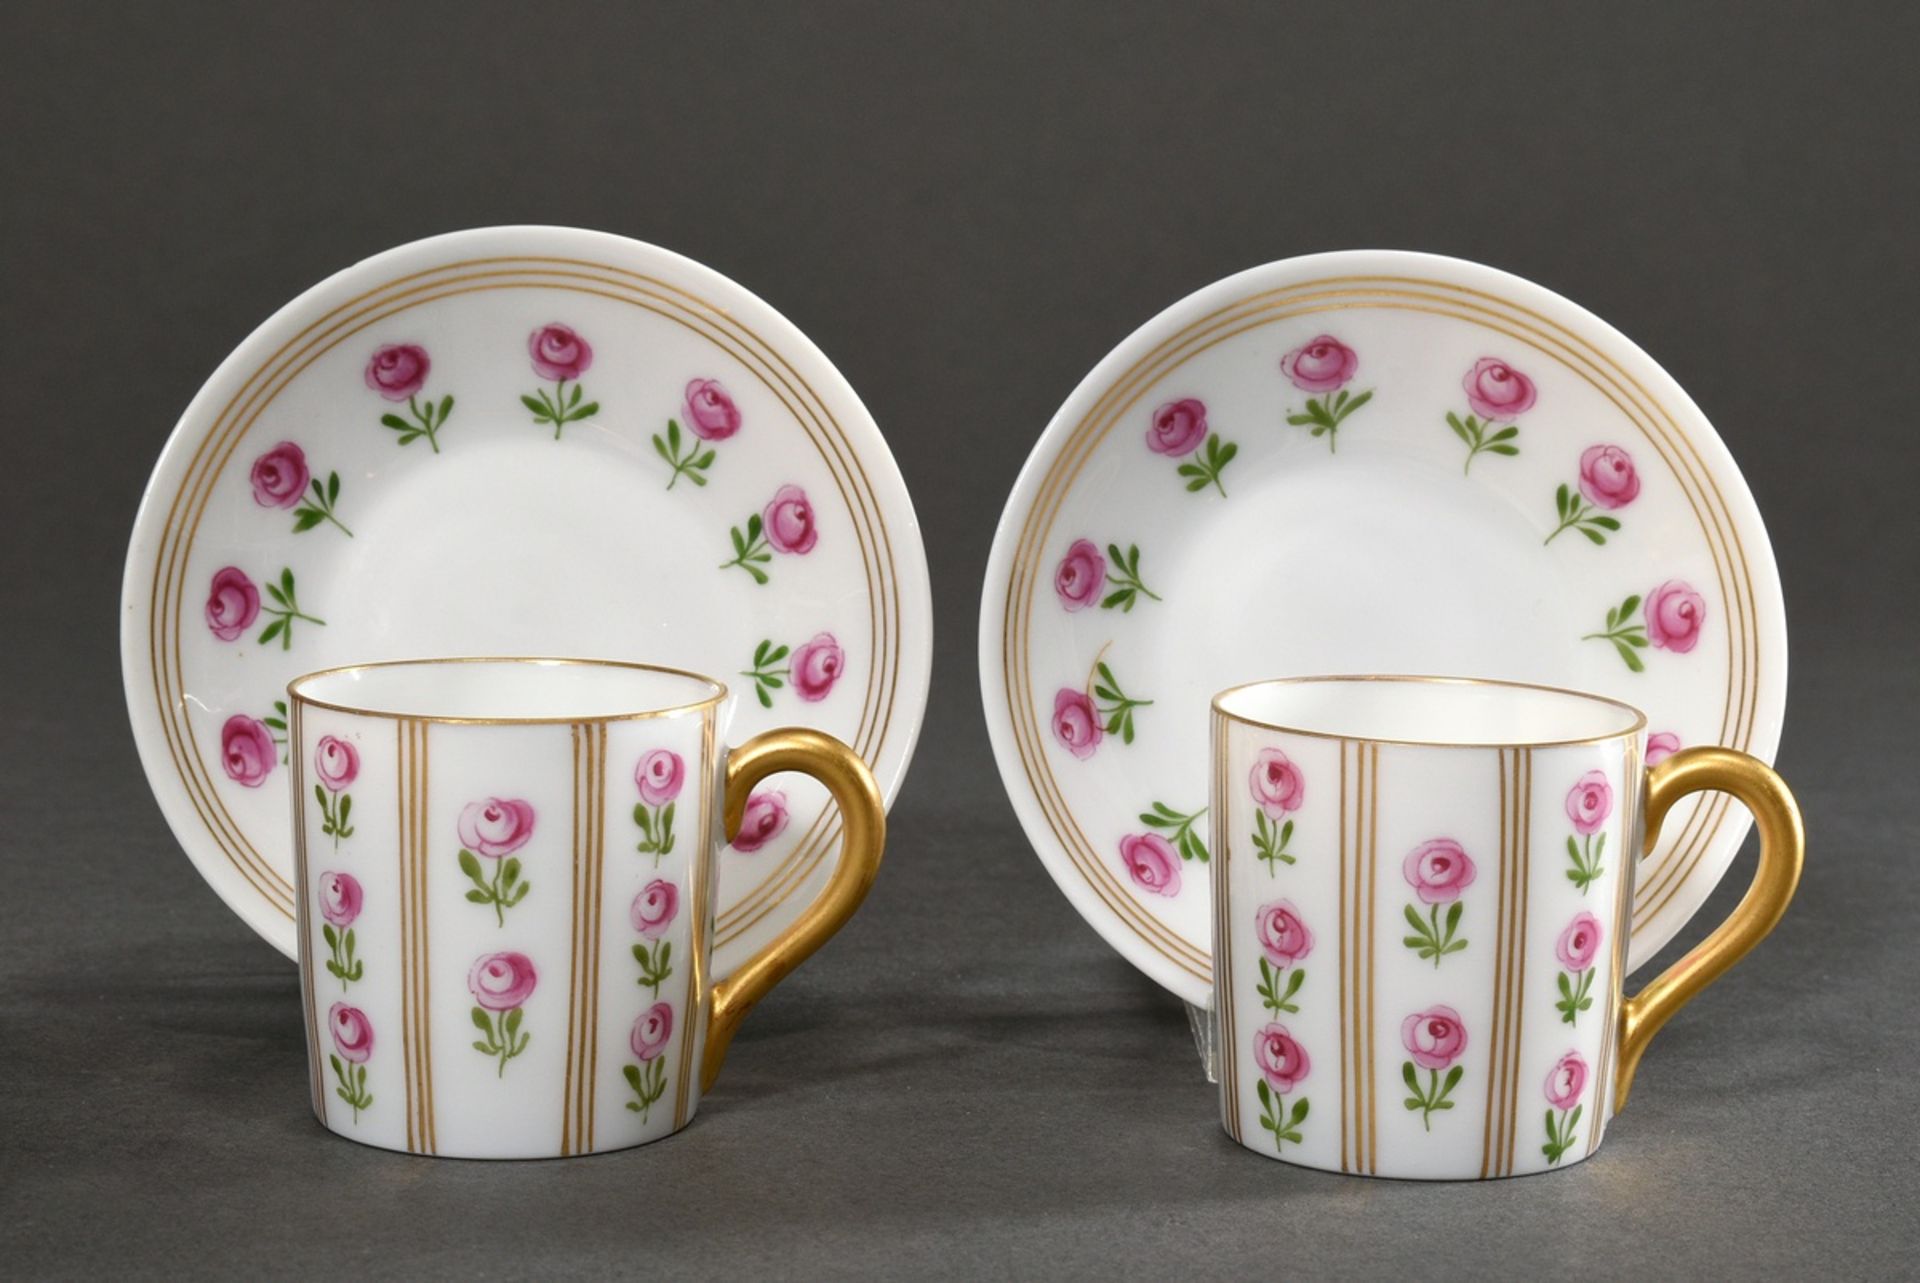 Pair of Nymphenburg mocha cups in cylindrical form "florets with gold stripes", 20th c., h. 5cm